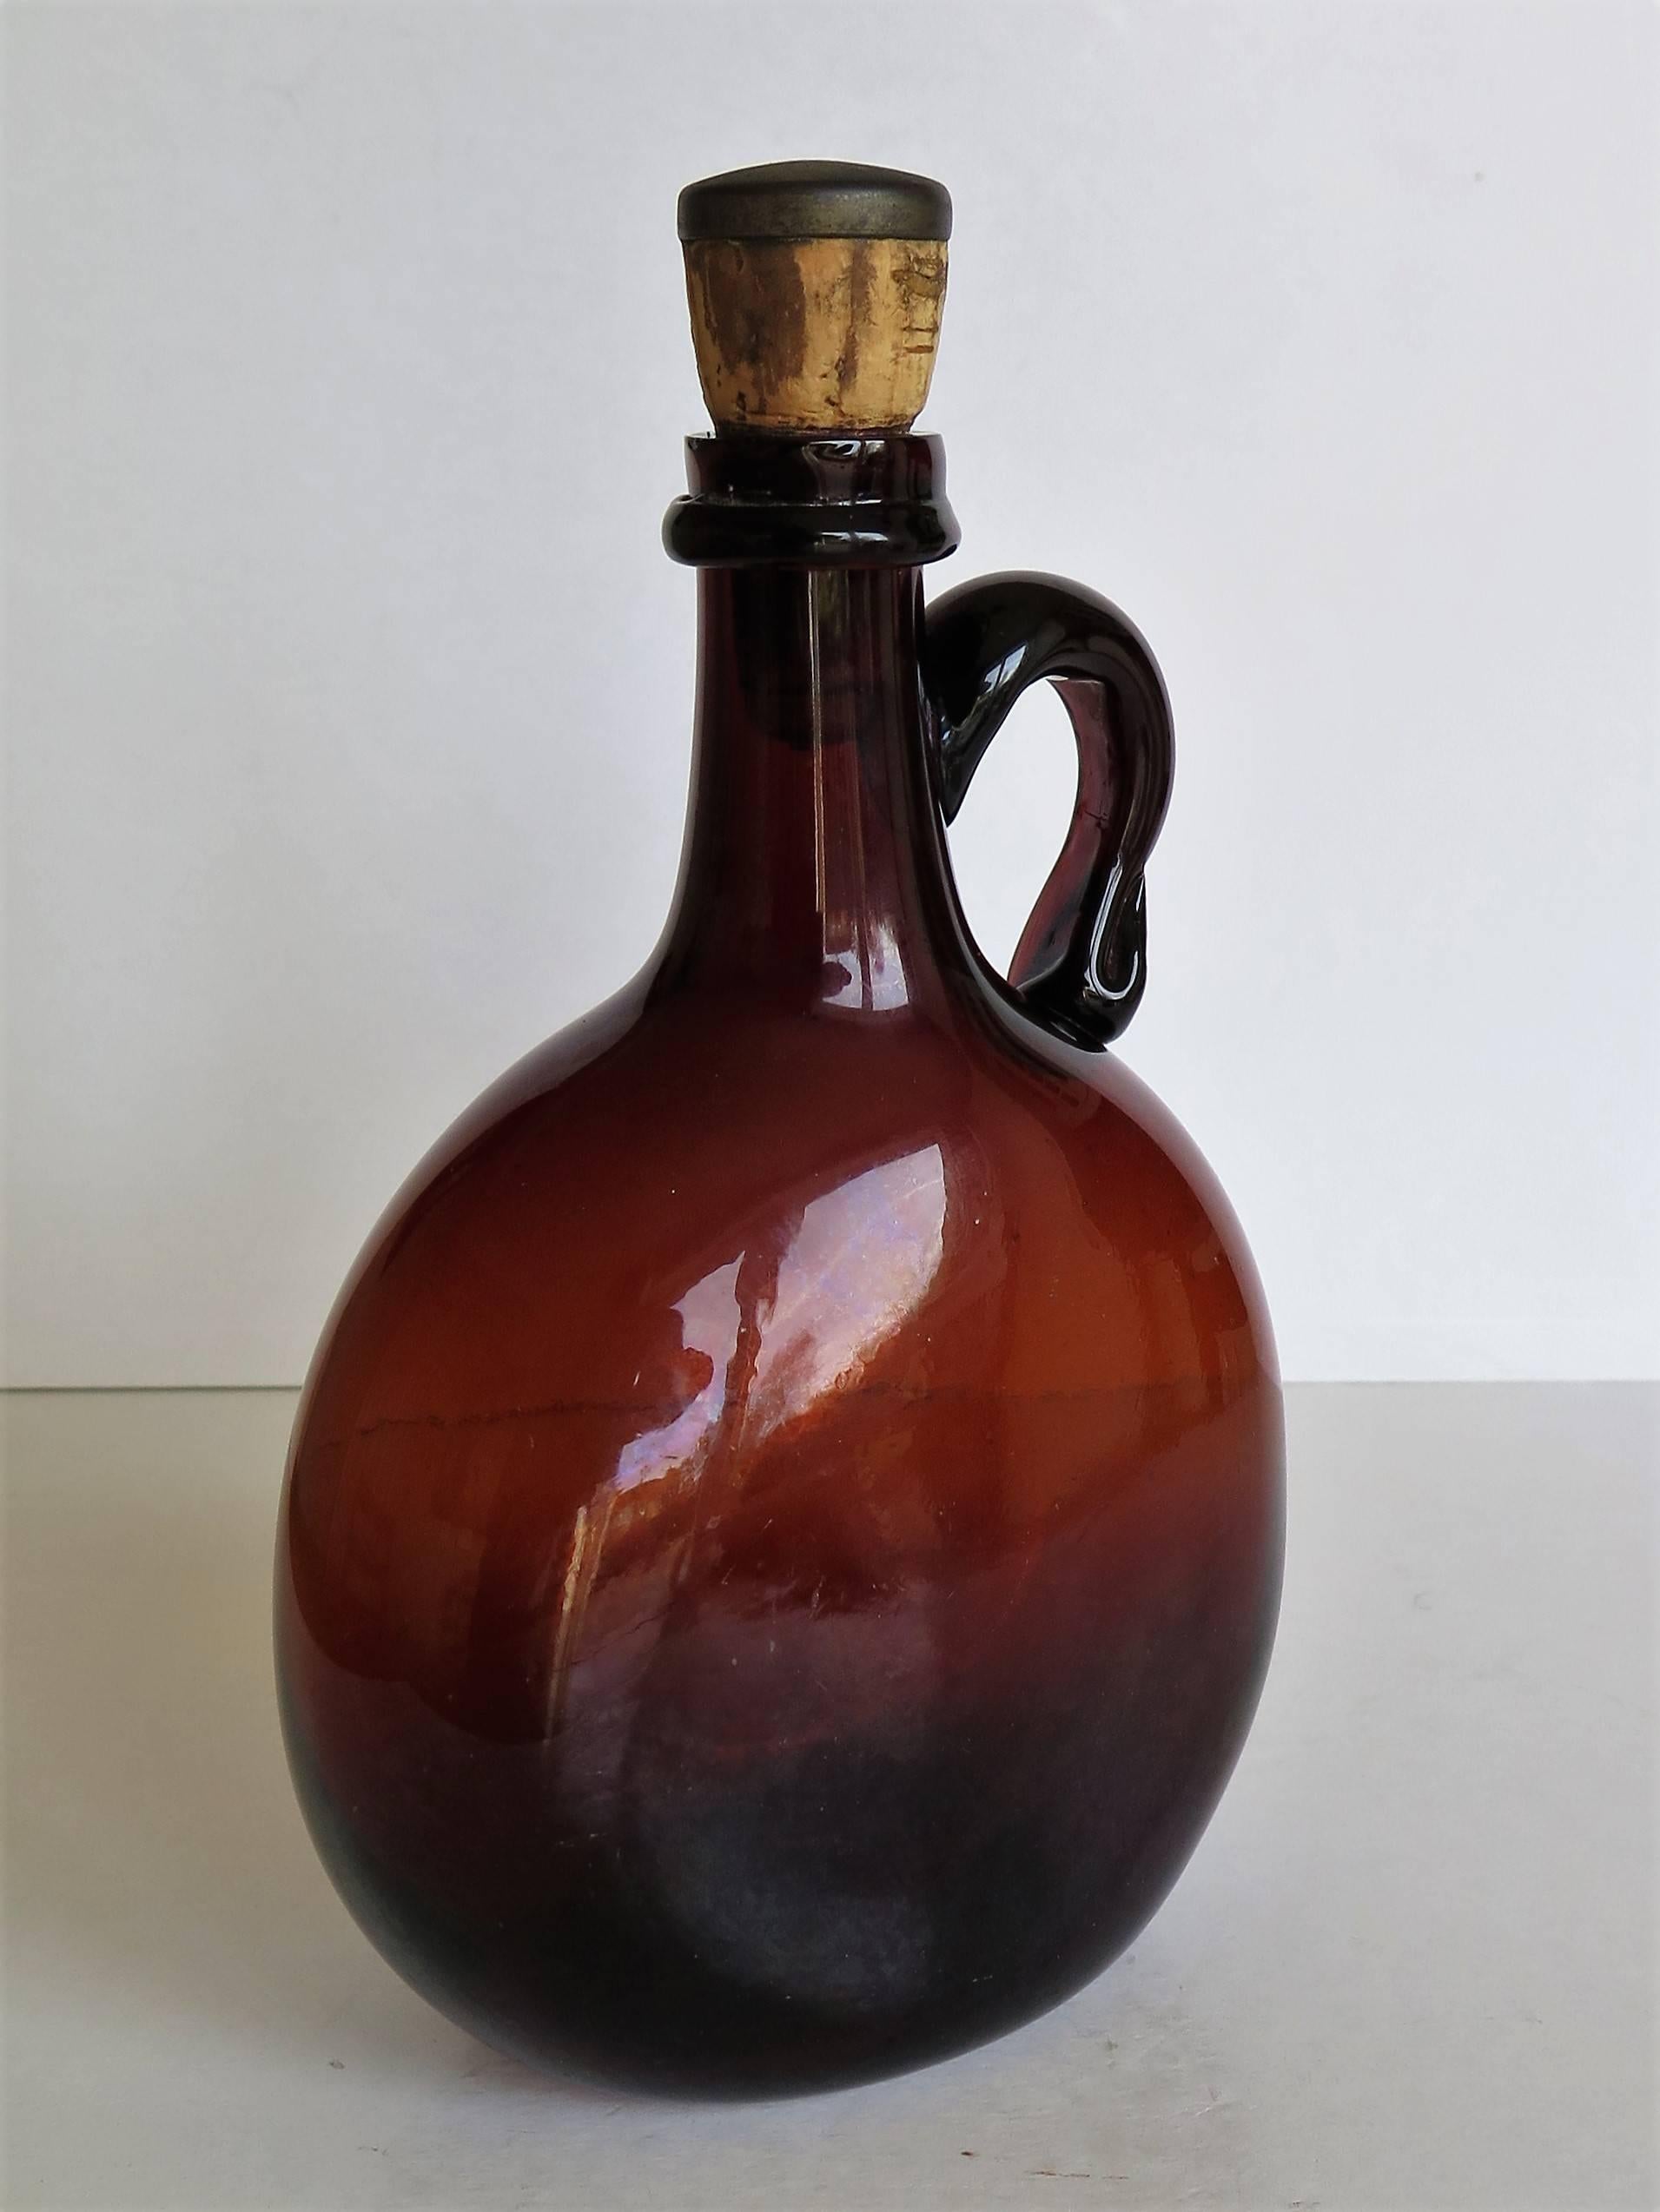 Rustic Amber Glass Flagon or Jug with Cork and Metal Stopper Handblown, Ca 1825